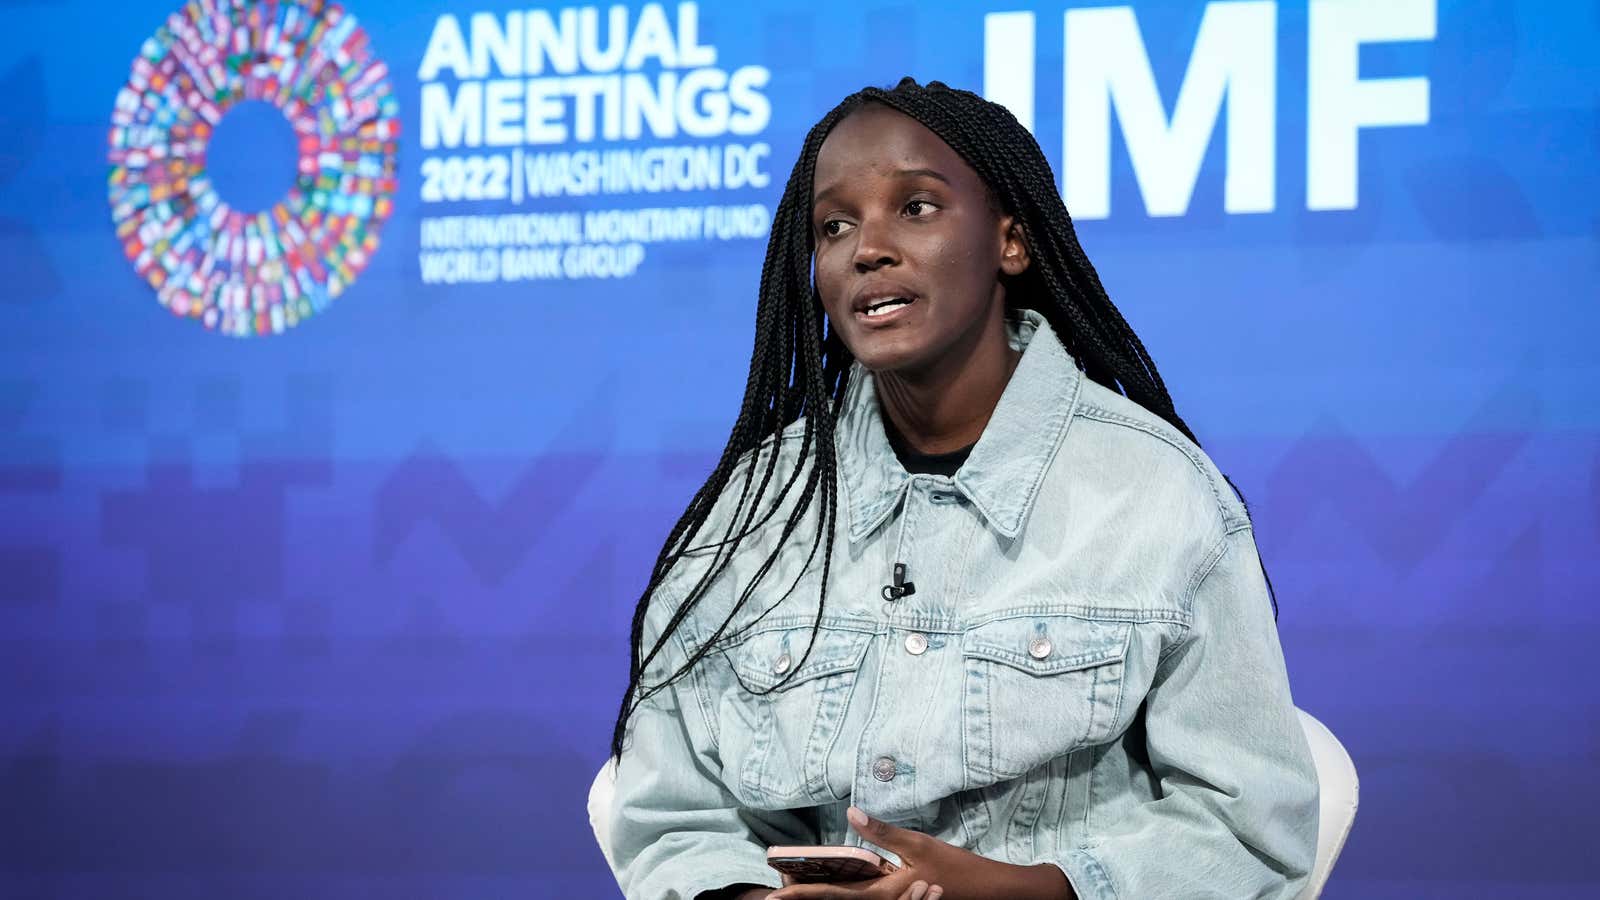 Ugandan climate activist Vanessa Nakate participates in a discussion on climate change at the IMF headquarters during its annual meetings on October 10, 2022 in Washington, DC.Â 